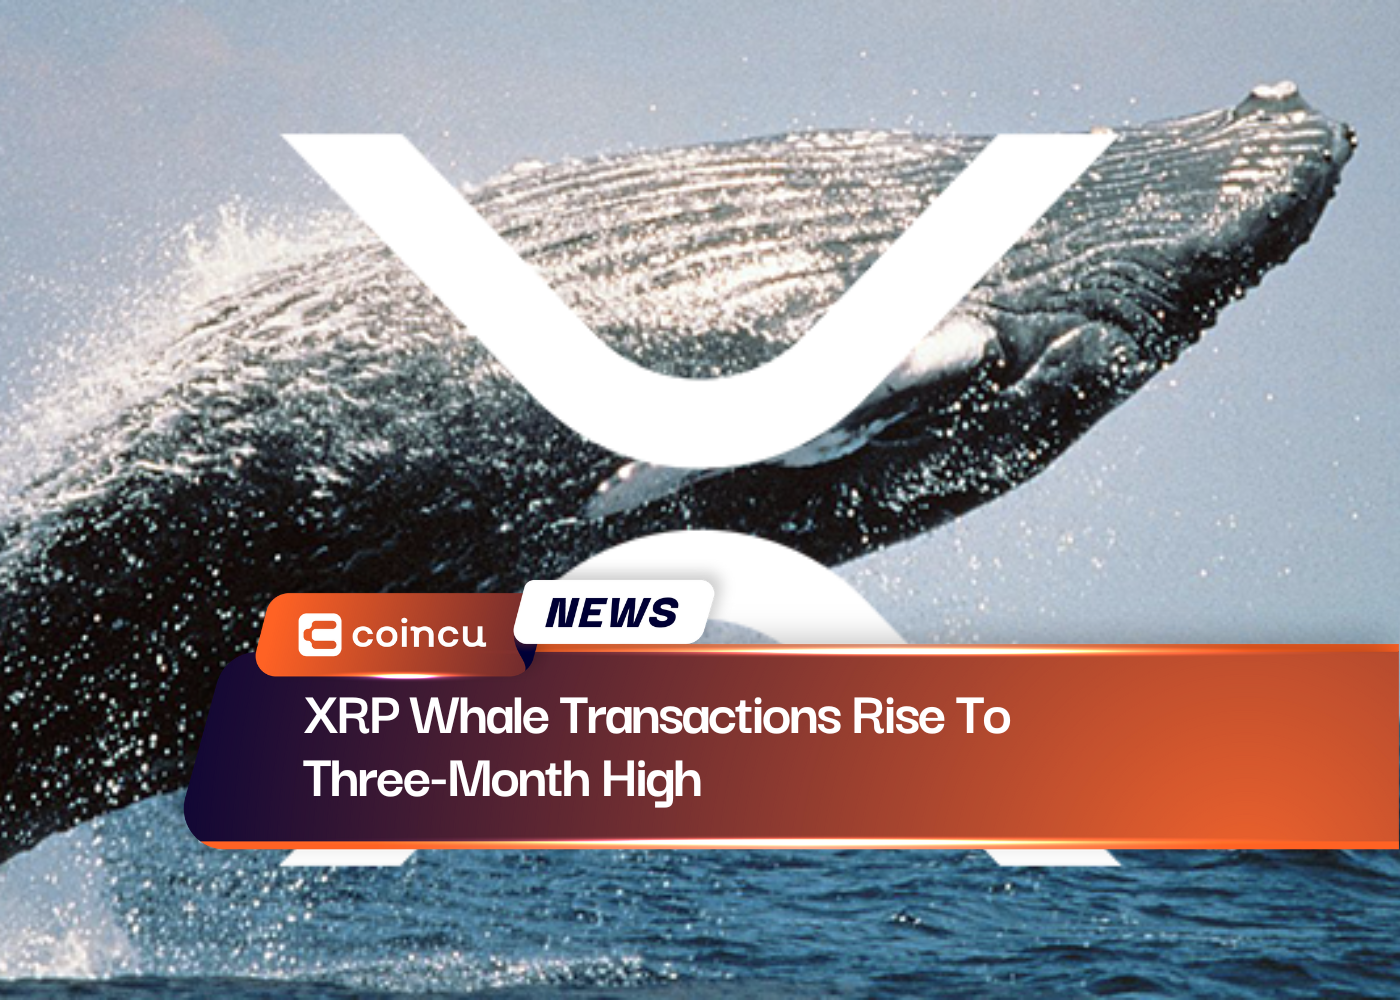 XRP Whale Transactions Rise To Three-Month High